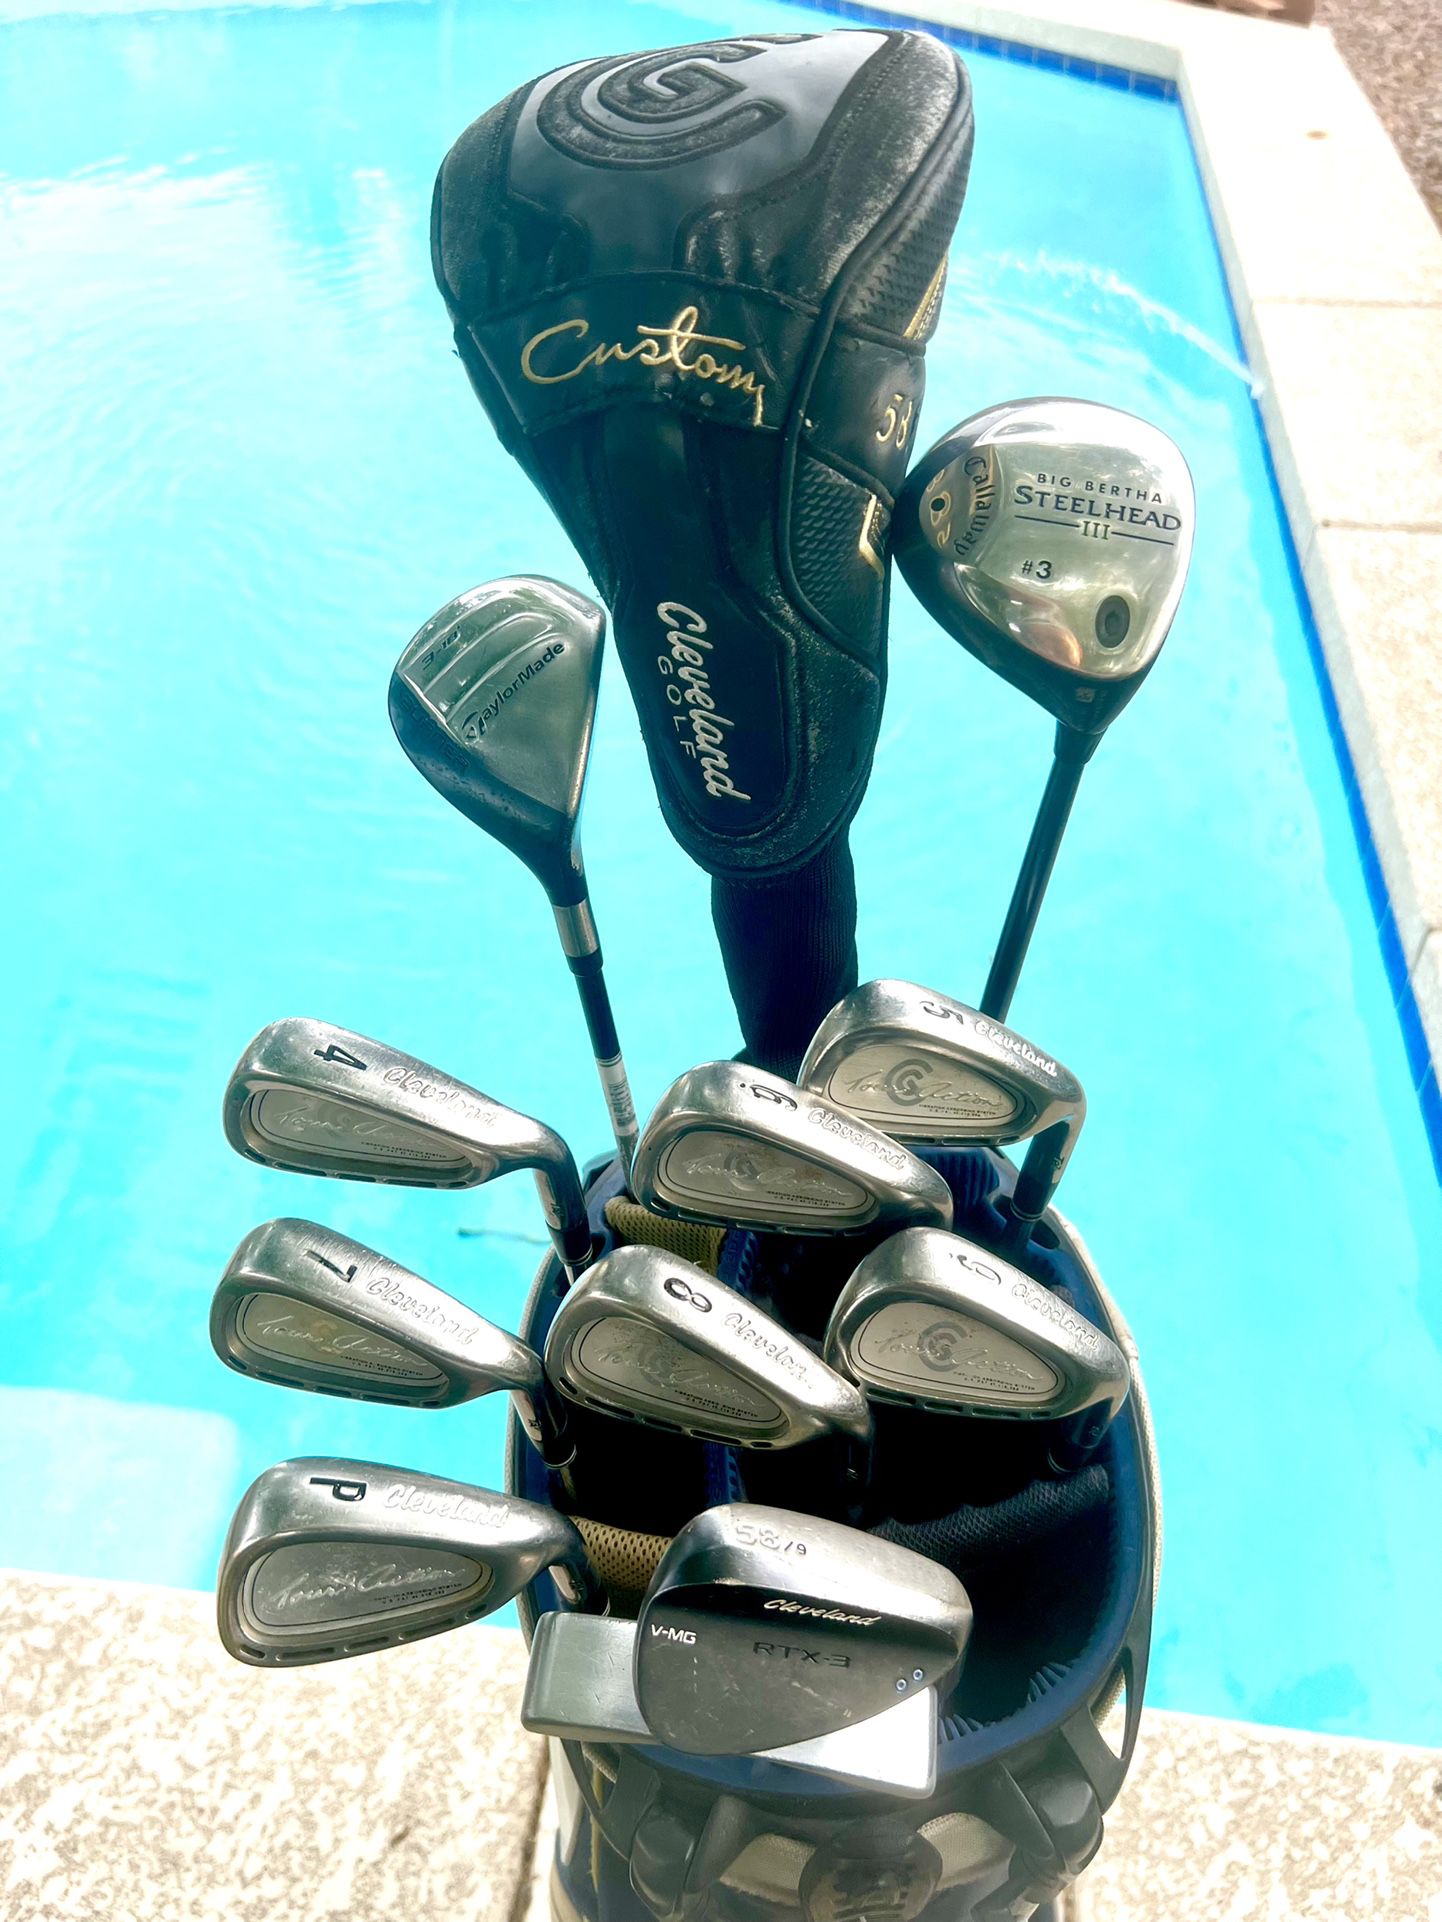 13PC CLEVELAND MENS GOLF CLUBS SET EVERYTHING YOU NEED! OGIO BAG *LOOK